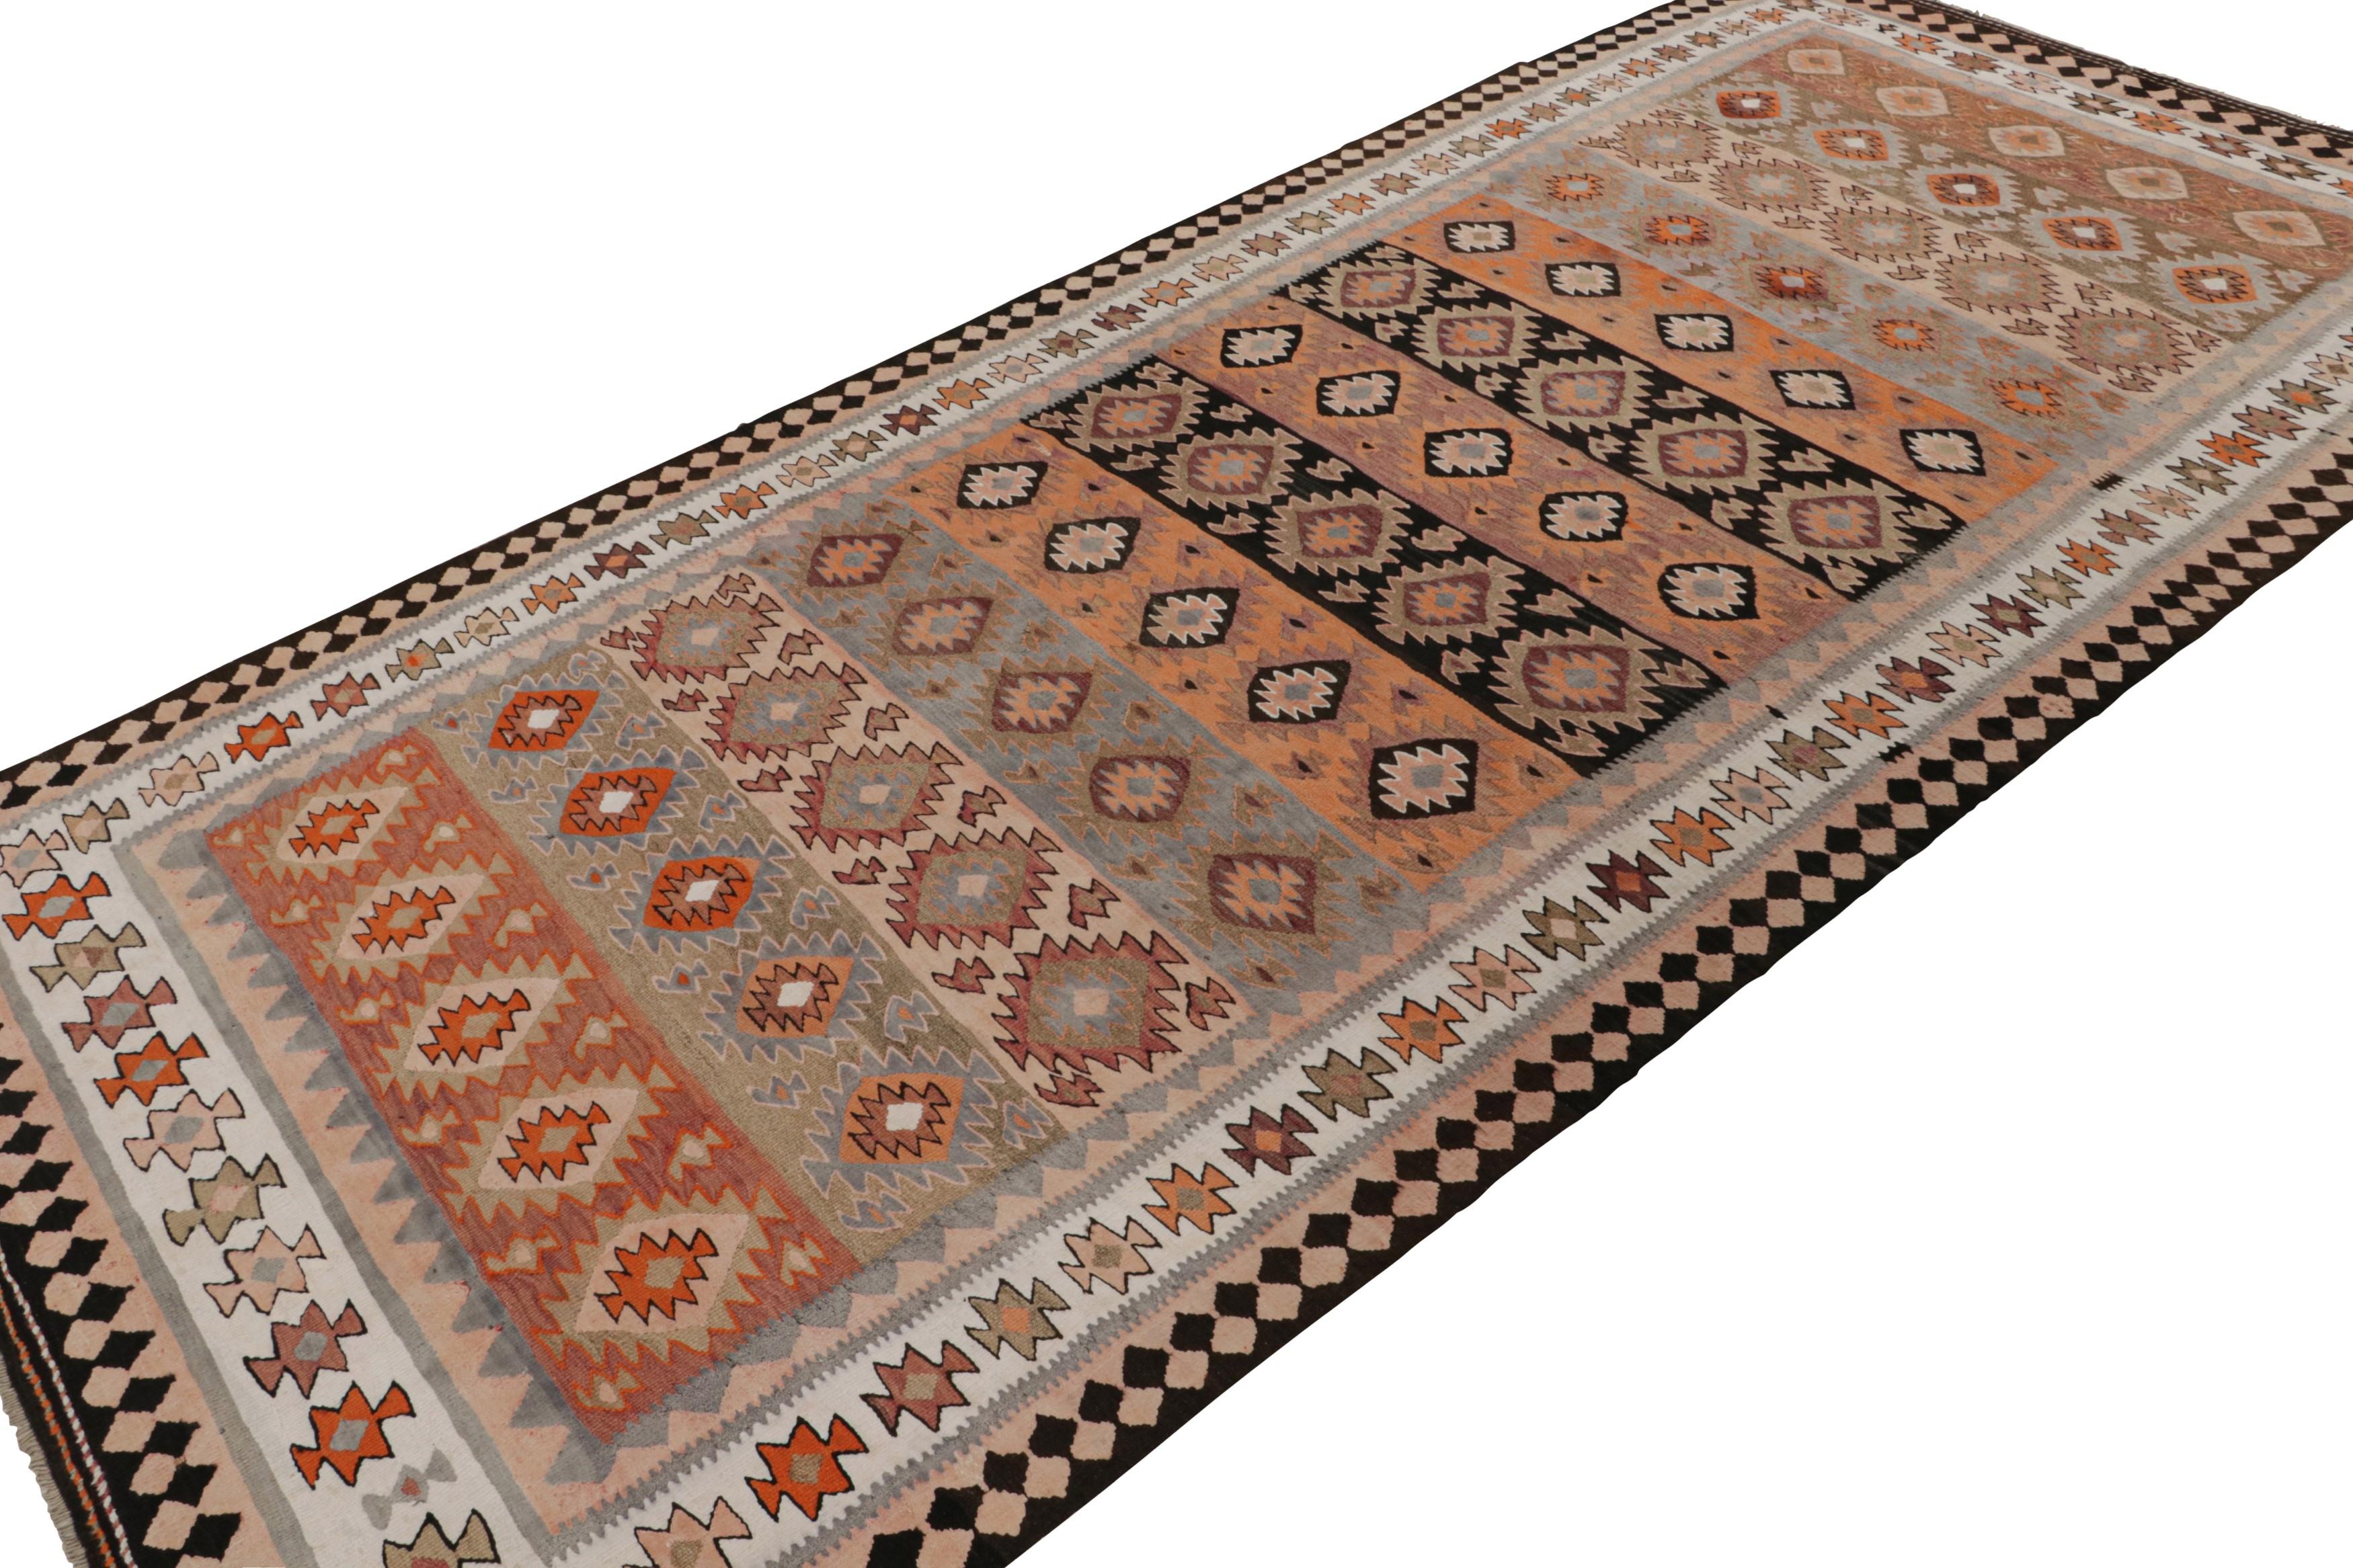 Handwoven in wool circa 1950-1960, this 5x12 vintage Afghan kilim is a new curation from Rug & Kilim’s collection. 

On the Design:

Specifically believed to be coming from tribal weavers, this 5x12 flatweave boasts a rich personality with